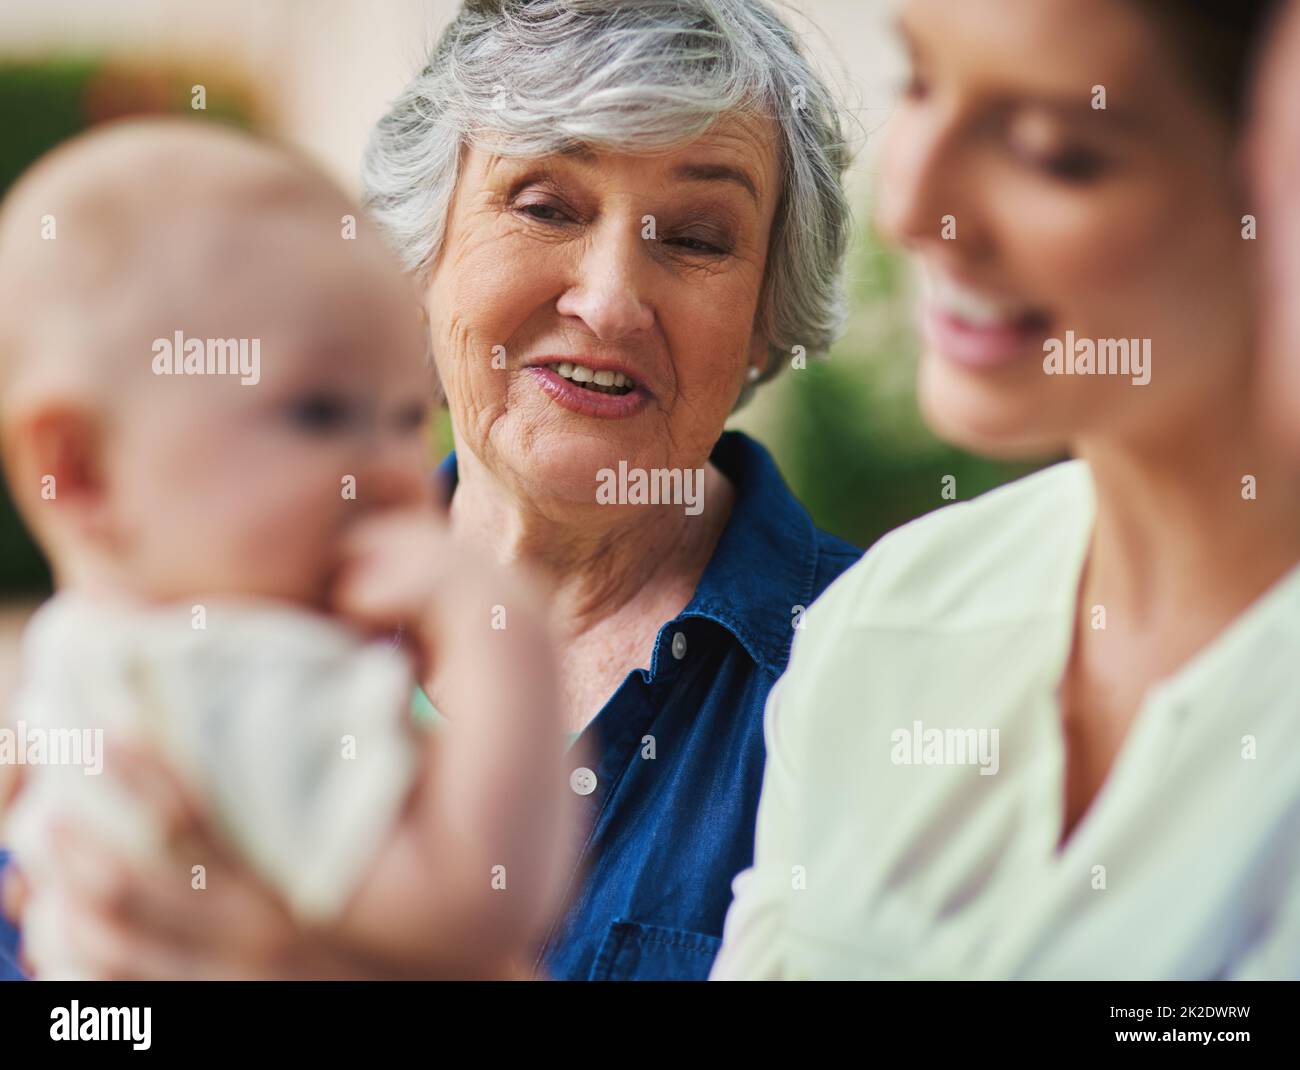 Hes just so adorable. Cropped shot of a three generational family spending time outdoors. Stock Photo